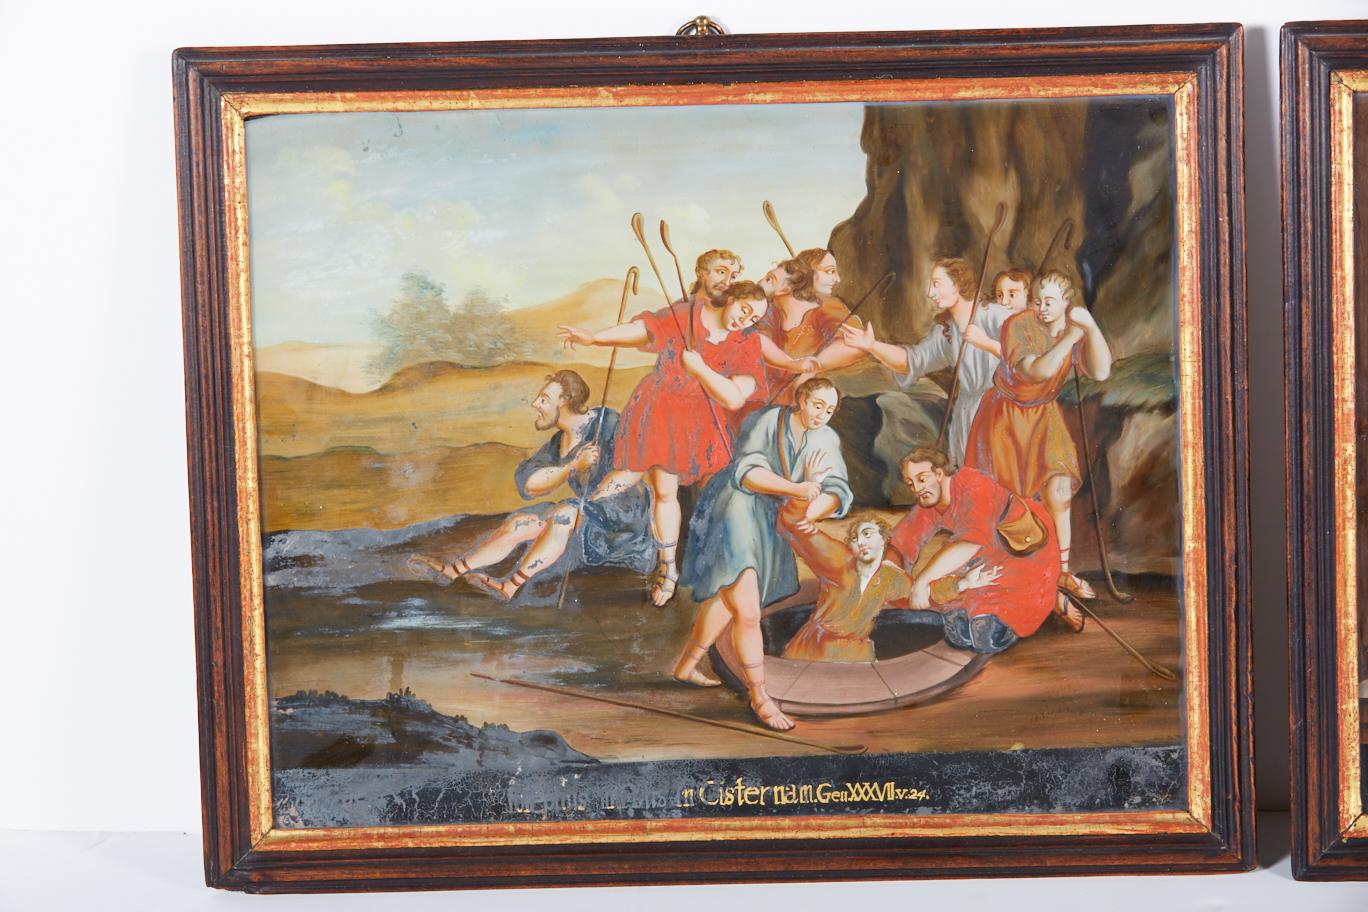 Pair of antique reverse glass paintings in original frames. These paintings depict two episodes in the Old Testament story of Joseph, one of his brothers casting him into the well and the other of his brothers presenting their father with Joseph's